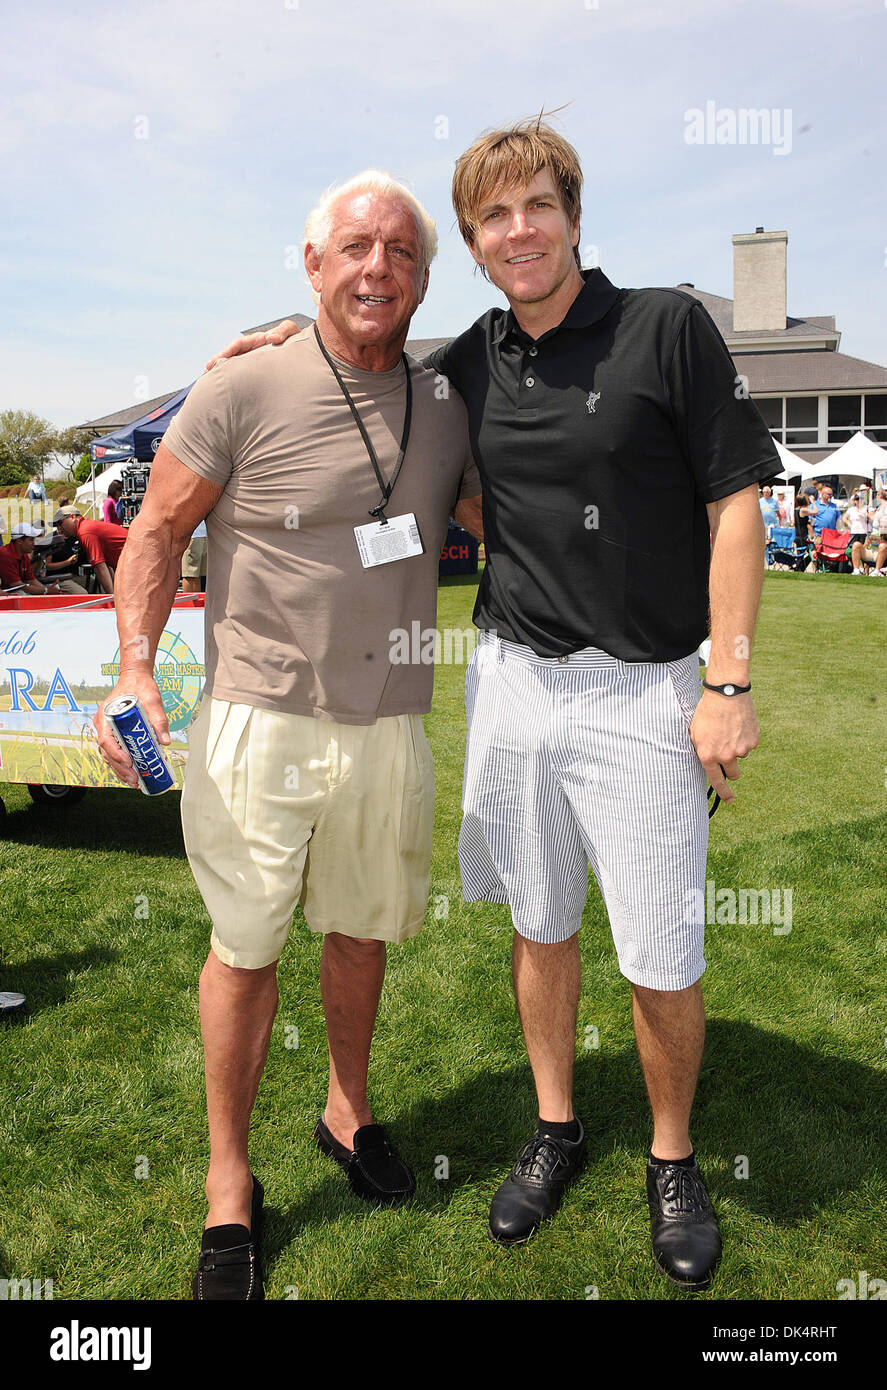 Apr 11, 2011 - Myrtle Beach, South Carolina; USA - Musician JACK INGRAM and Wrestler RIC FLAIR take a moment to pose for a picture as they  participates in the 17th Annual Monday After The Masters Celebrity Pro-Am Golf Tournament that took place at the Barefoot Landing Golf Resort located in Myrtle Beach.  Copyright 2011 Jason Moore. (Credit Image: © Jason Moore/ZUMAPRESS.com) Stock Photo